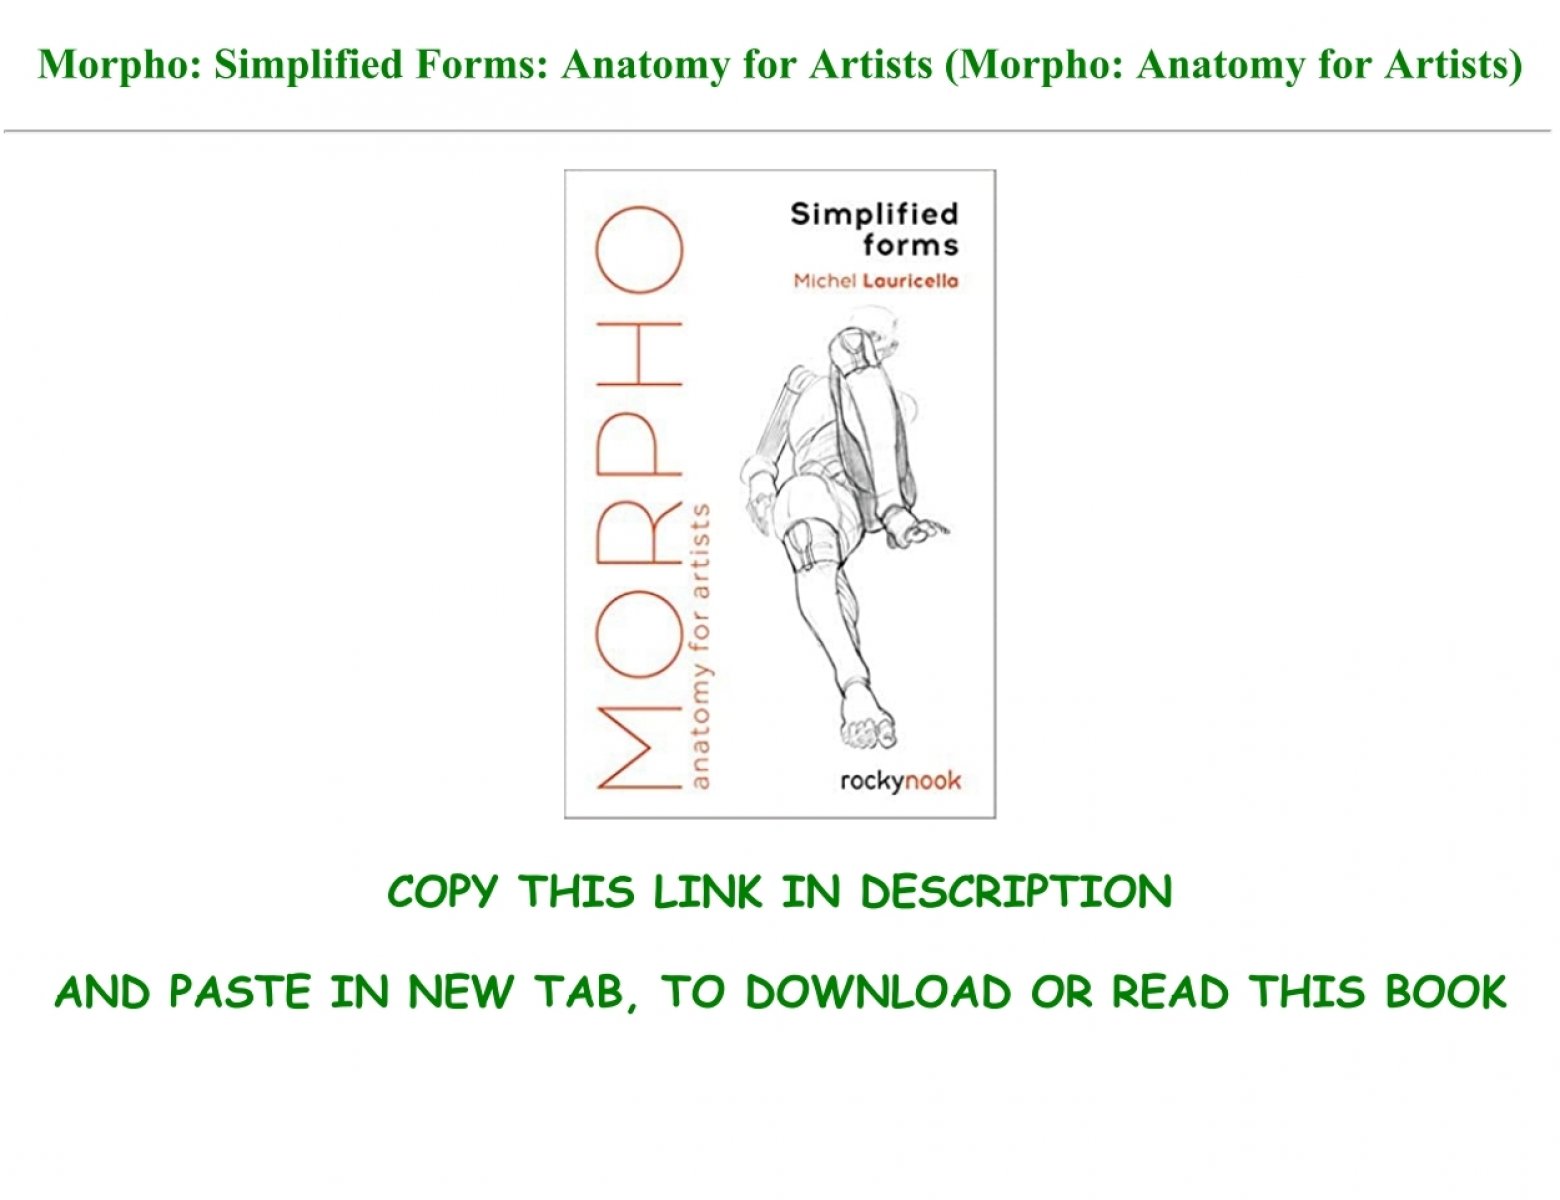 morpho-simplified-forms-anatomy-for-artists-morpho-anatomy-for-artists